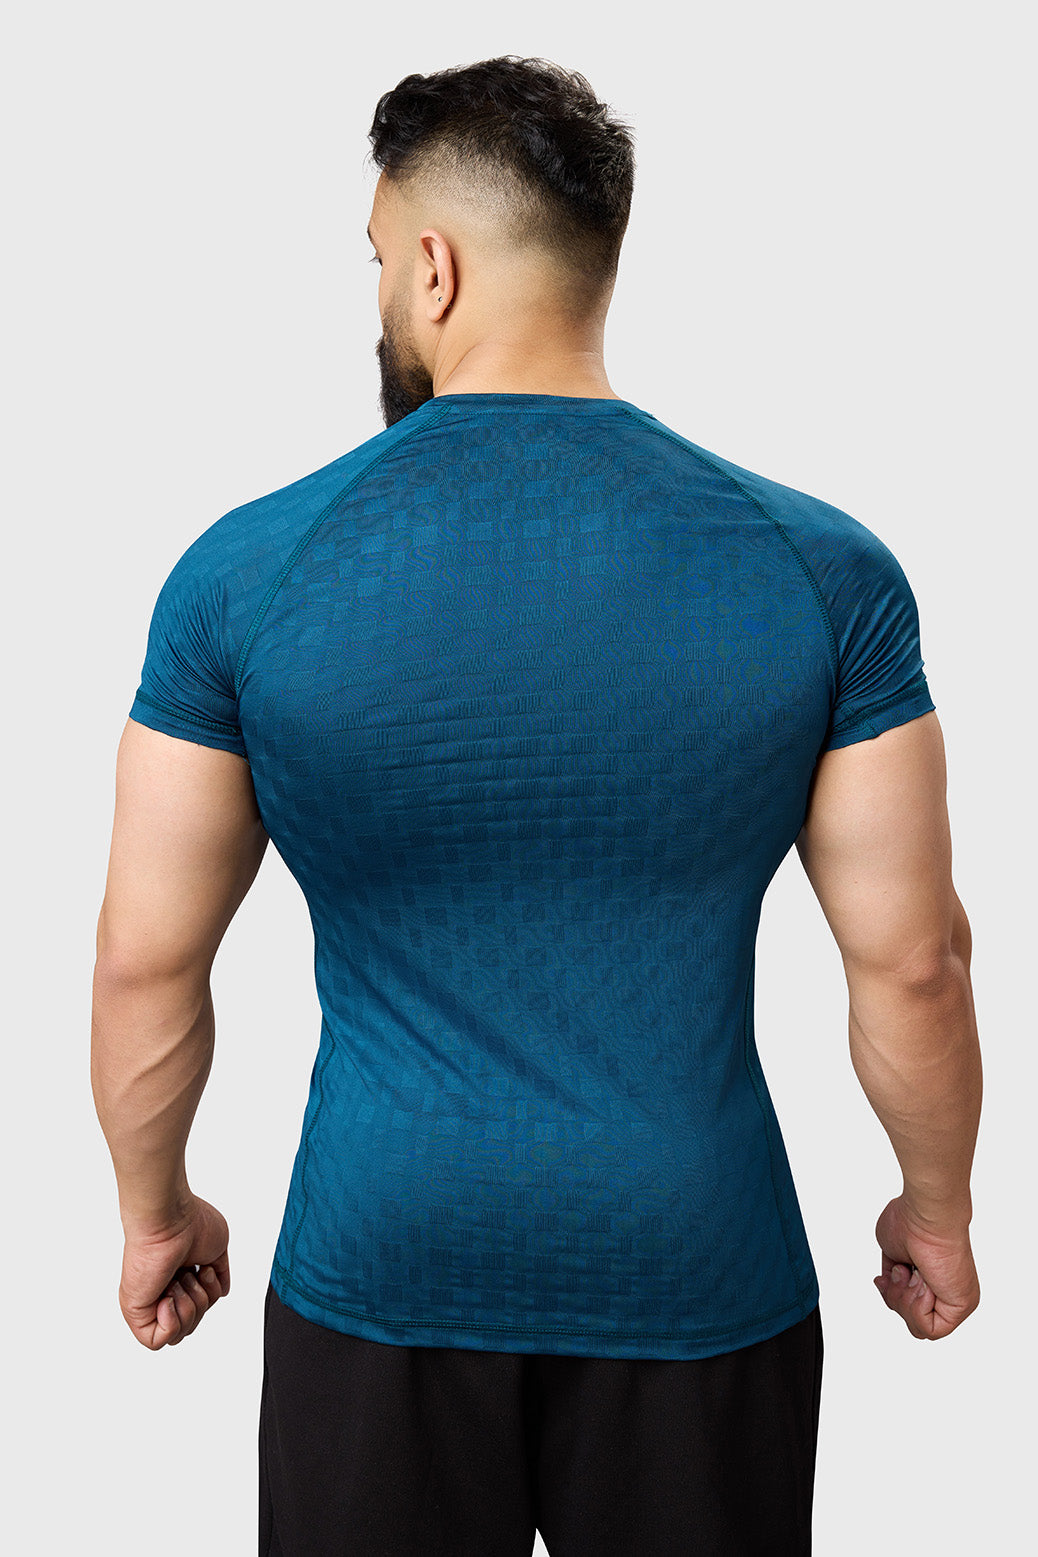 Astral T-shirt Teal